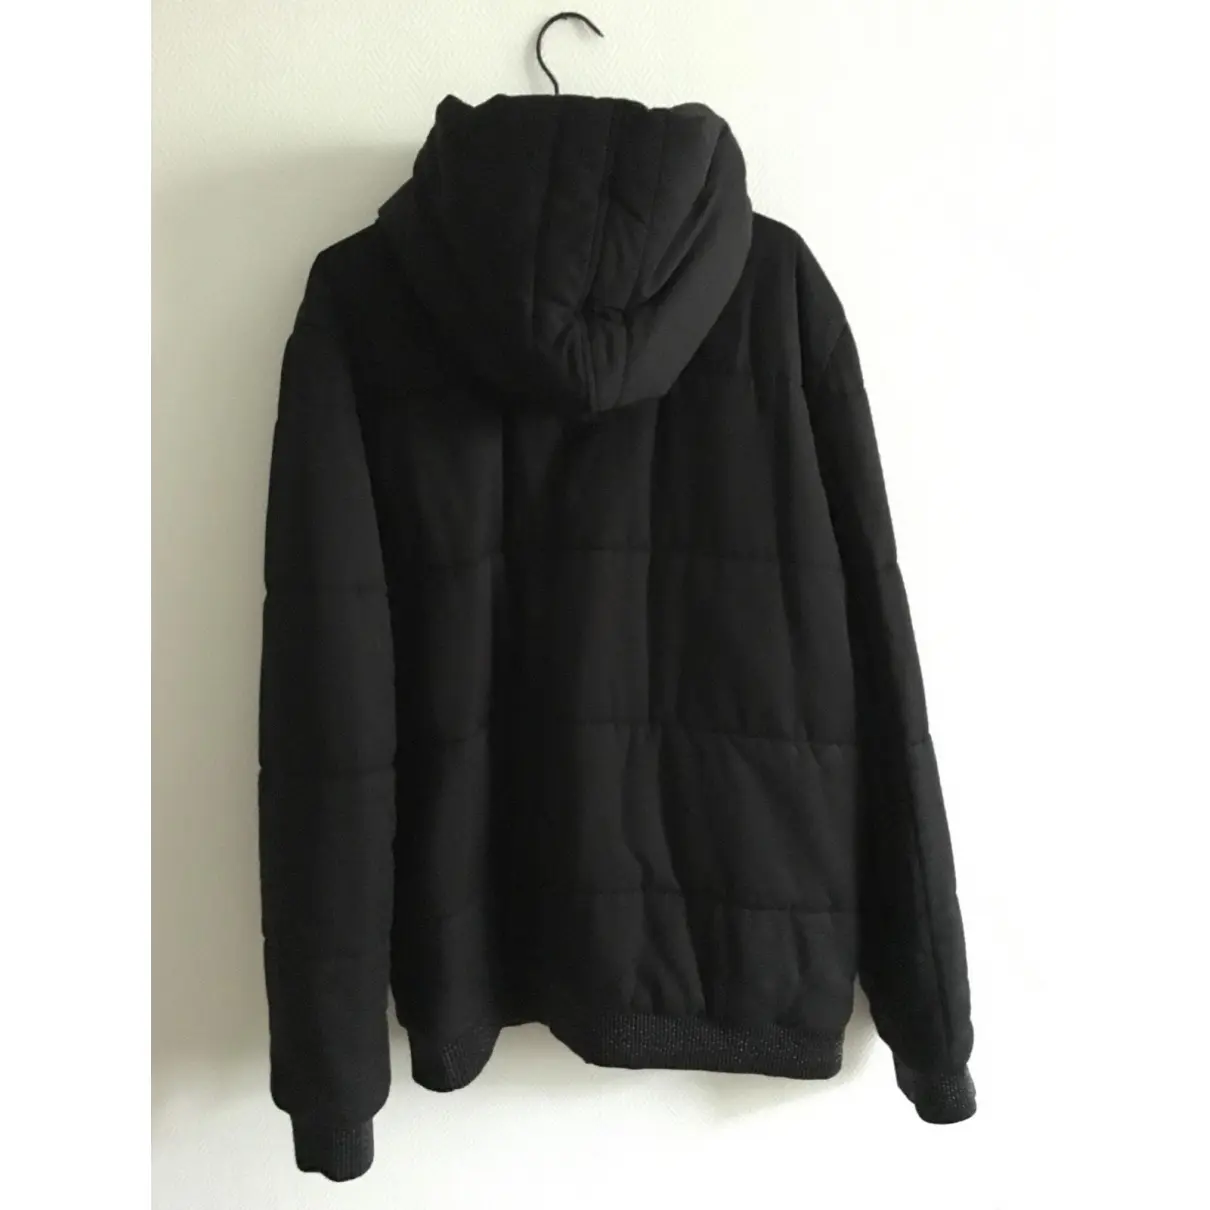 Buy T by Alexander Wang quilted down jacket online